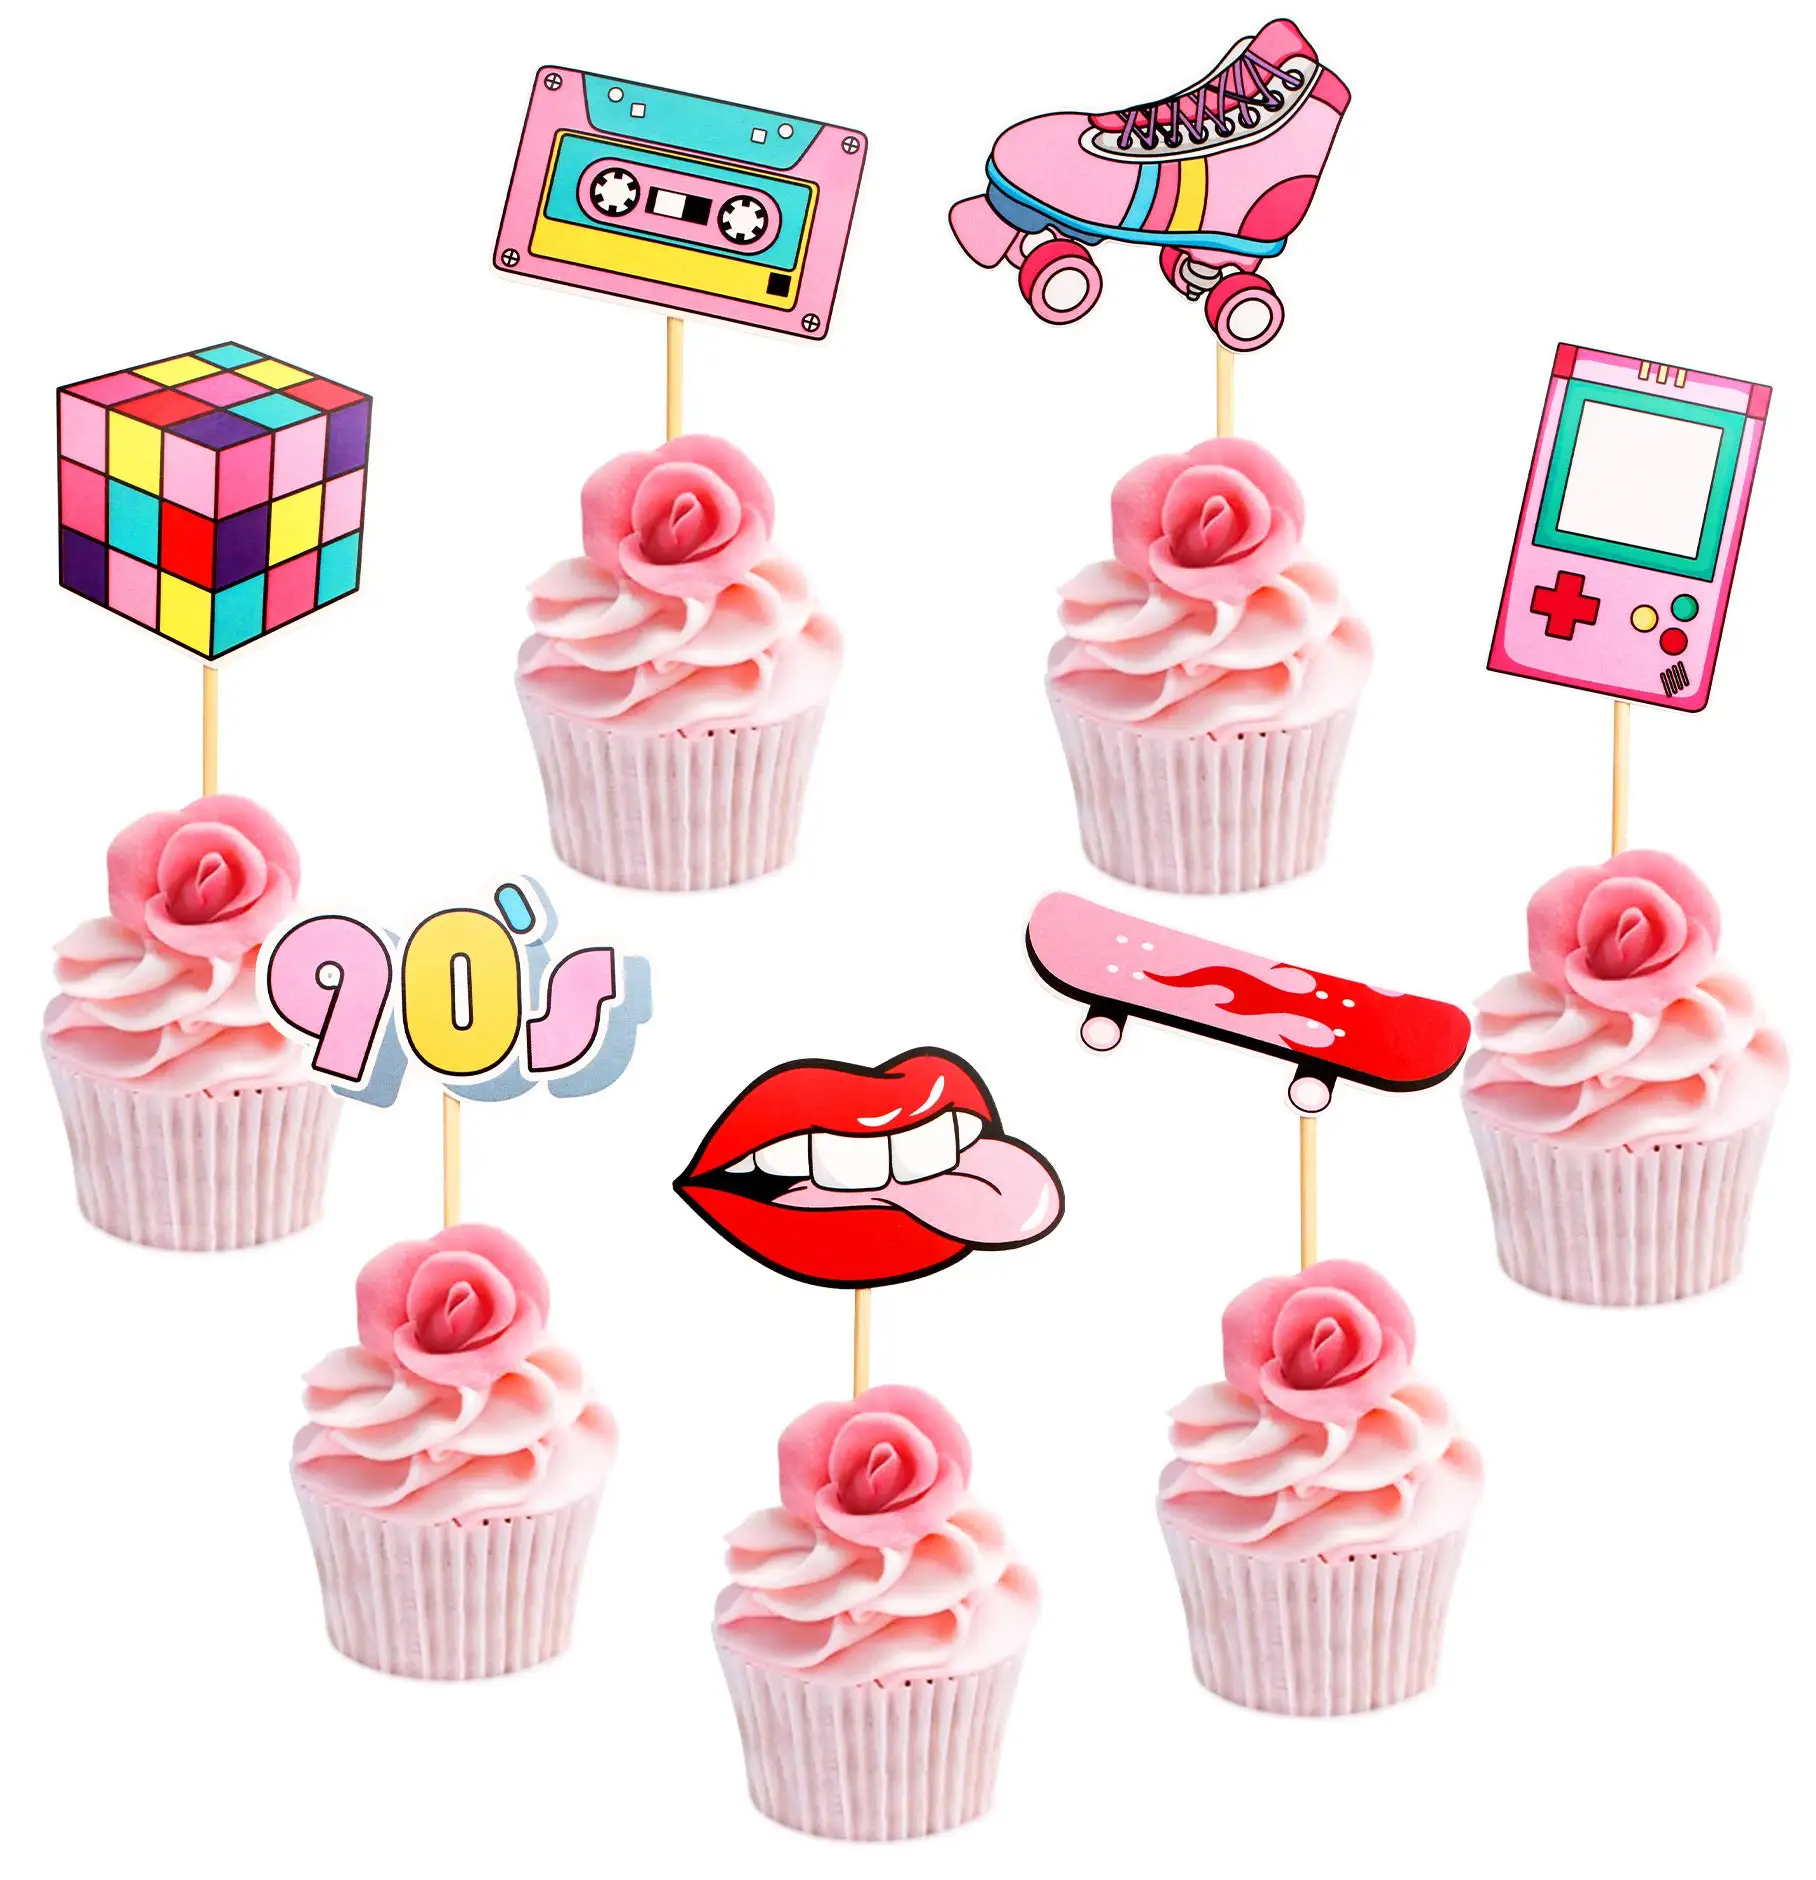 21Pcs 80s 90s Themed Cupcake Toppers Dessert Cupcake Toppers Birthday Supplies Throwback Party Favors Decorations 10pcs glitter paper 1 cupcake toppers 1st birthday party decorations first baby boy girl my one year supplies